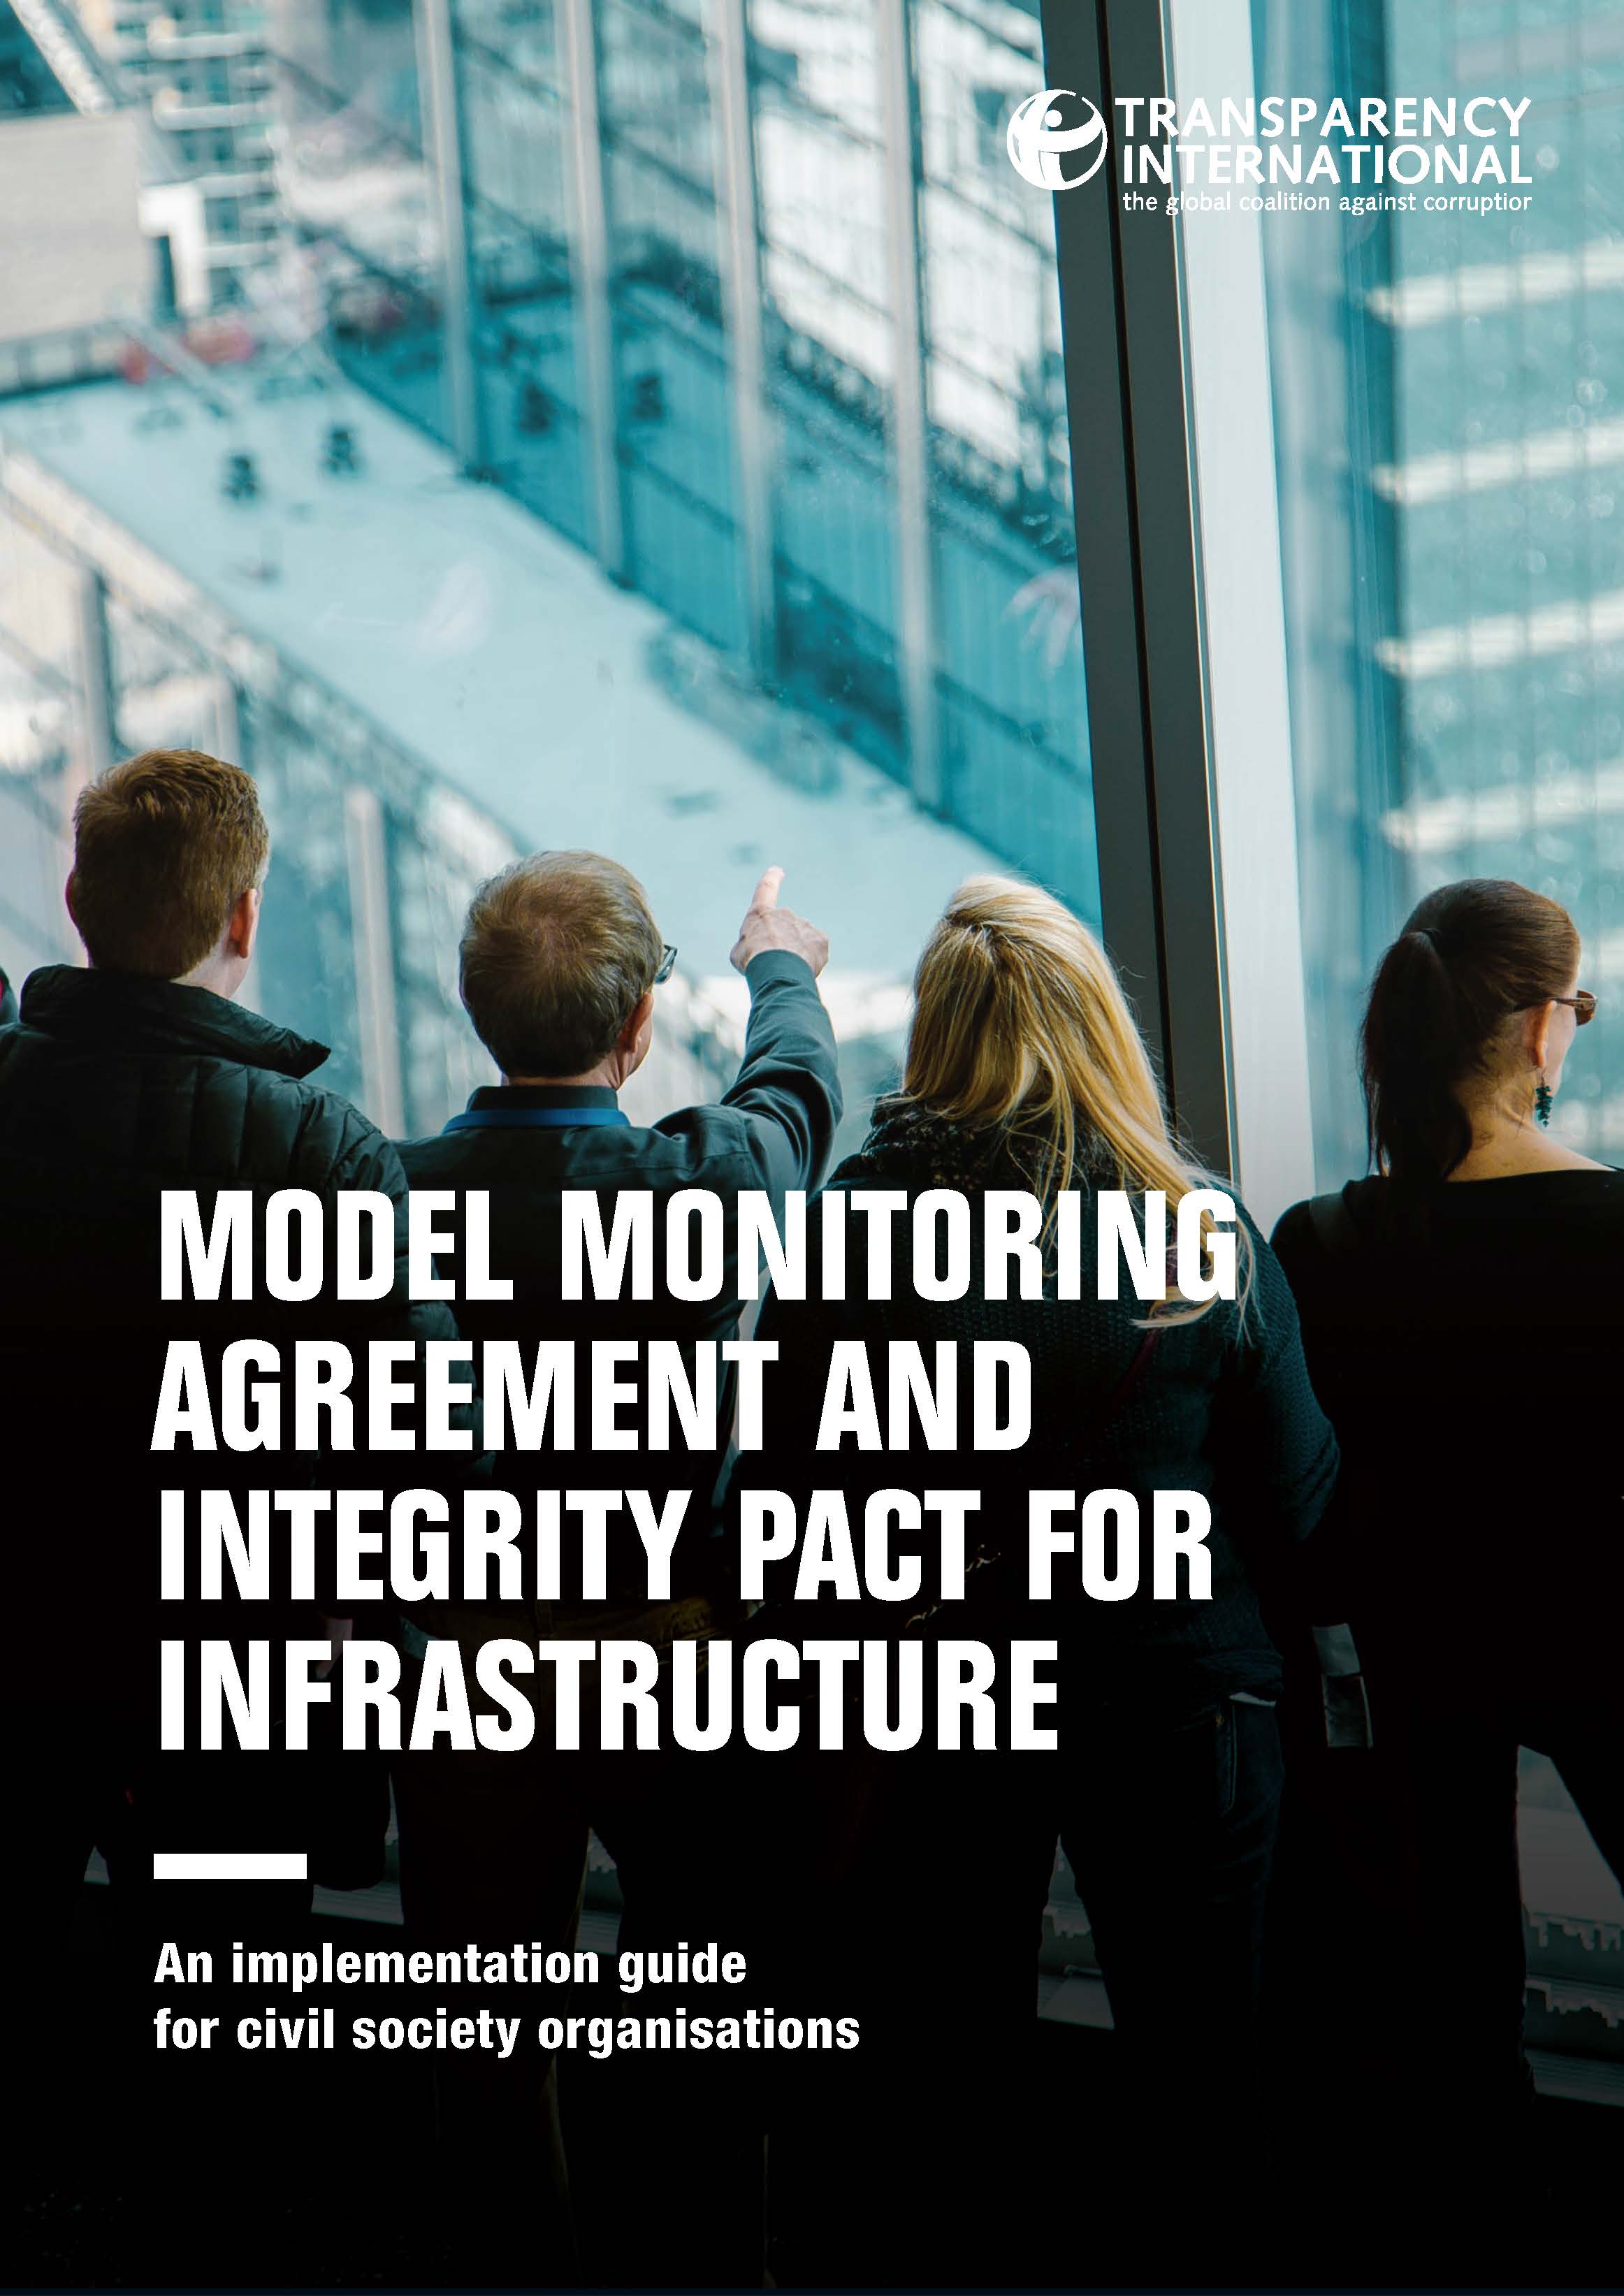 Pages from TI_Model Monitoring_Integrity_Pact_Infrastructure_2018.jpg